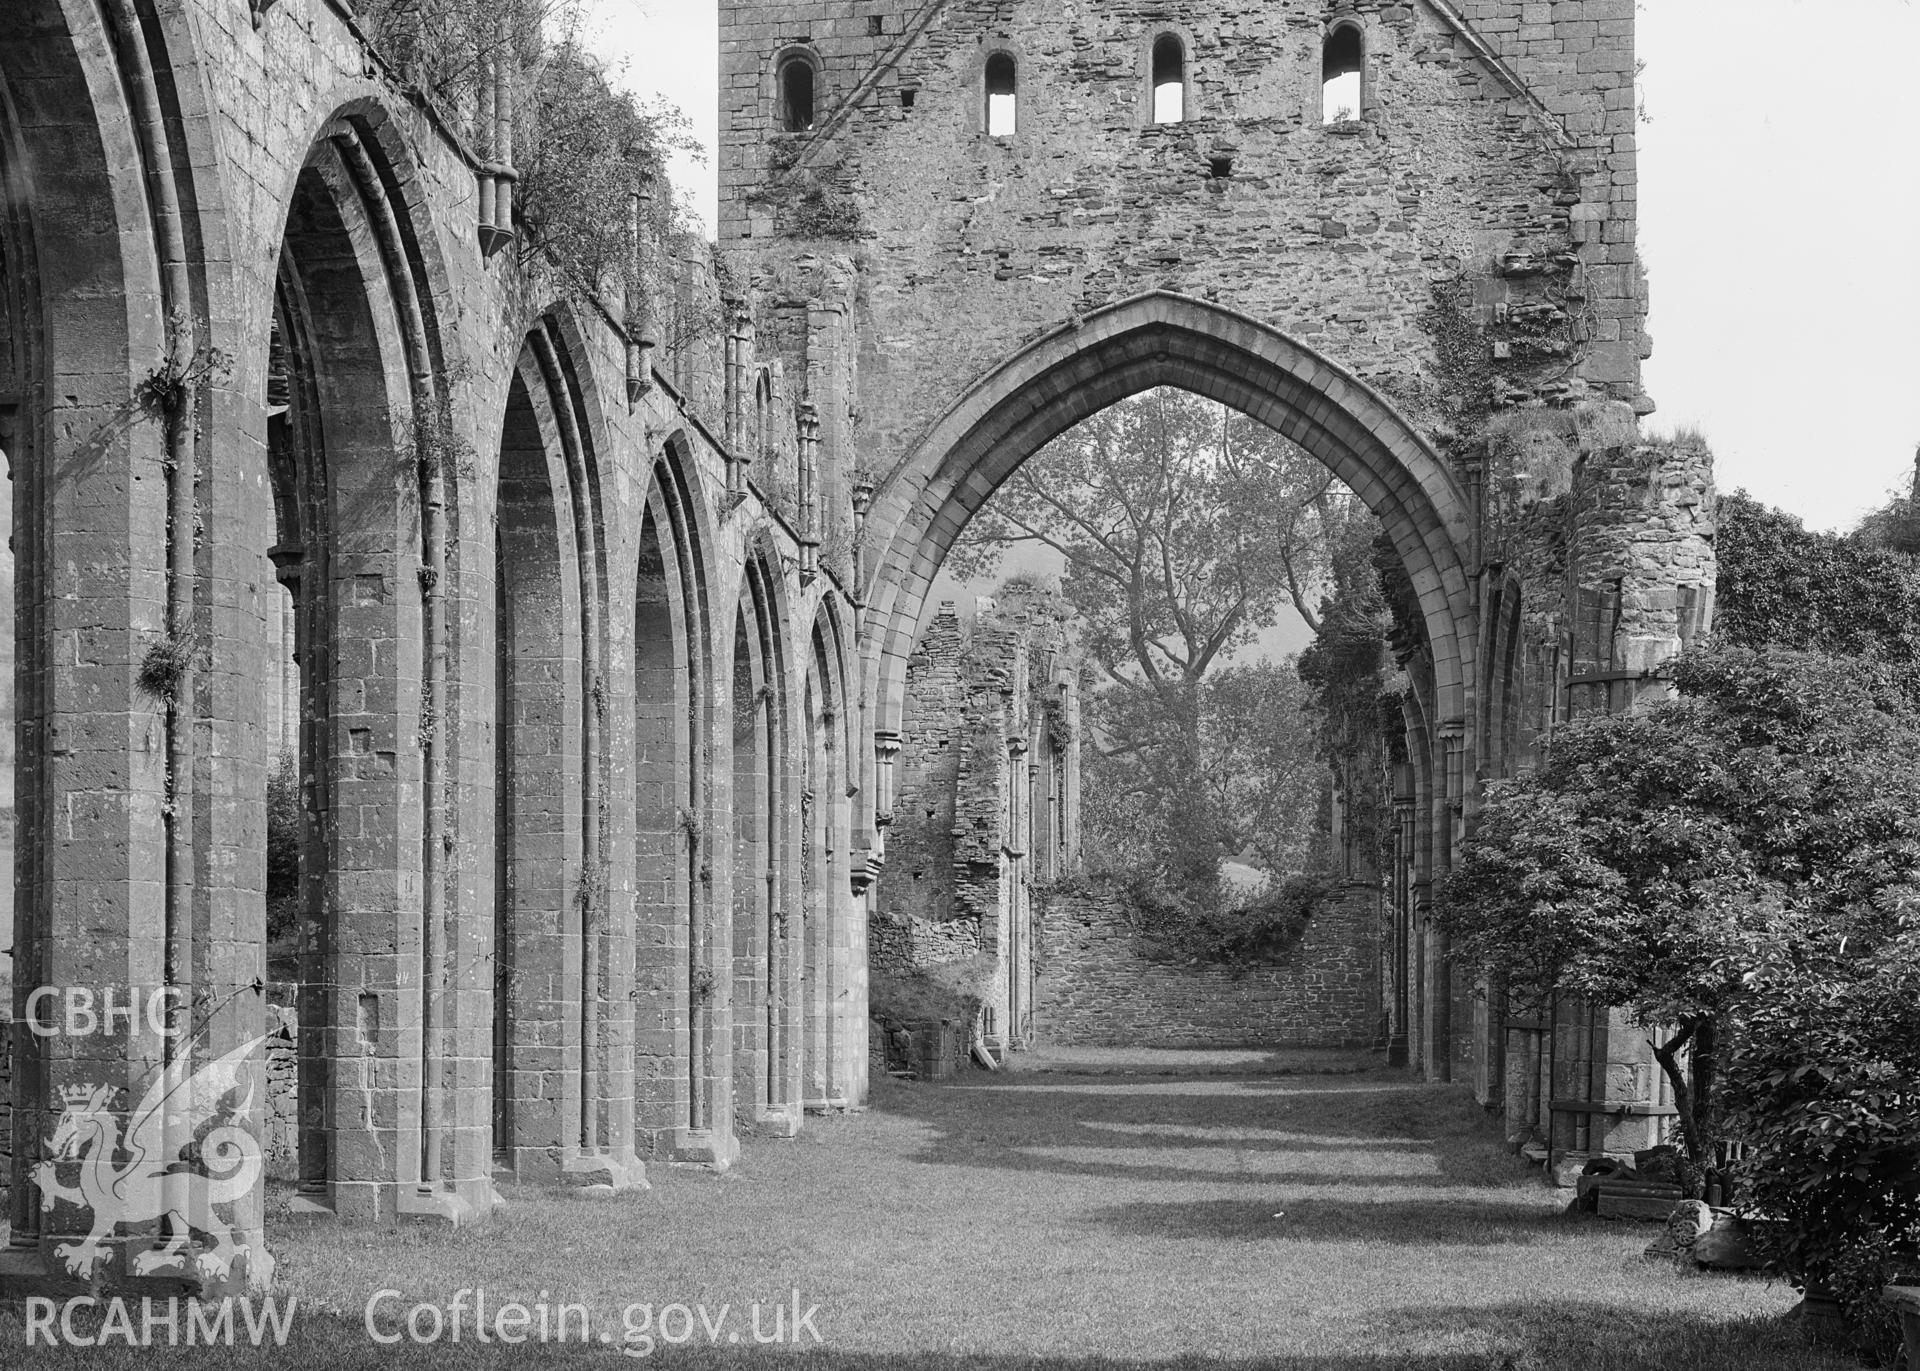 View of the nave of Llanthony Abbey from the west.